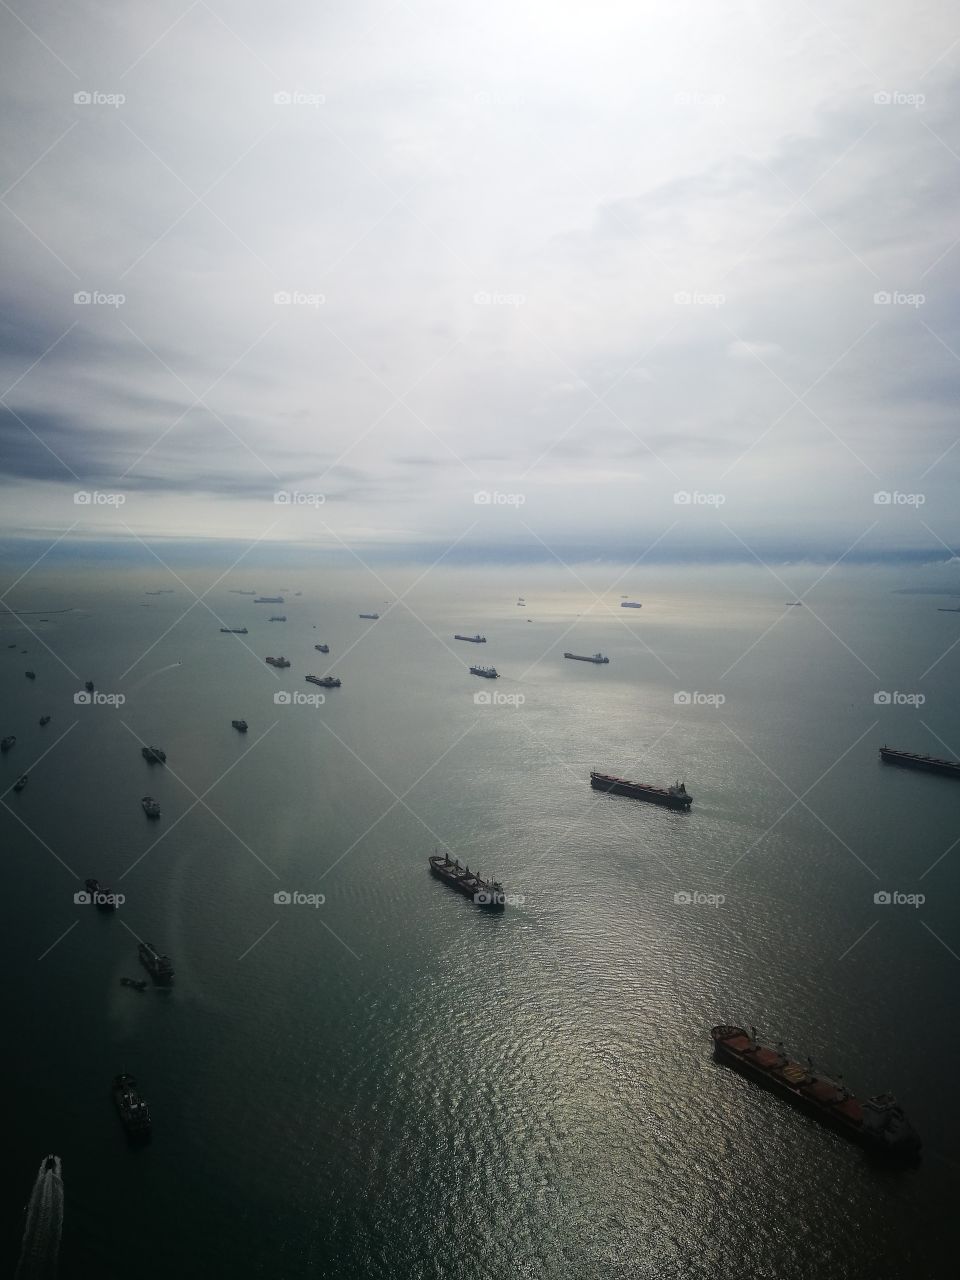 Ships parked on the sea